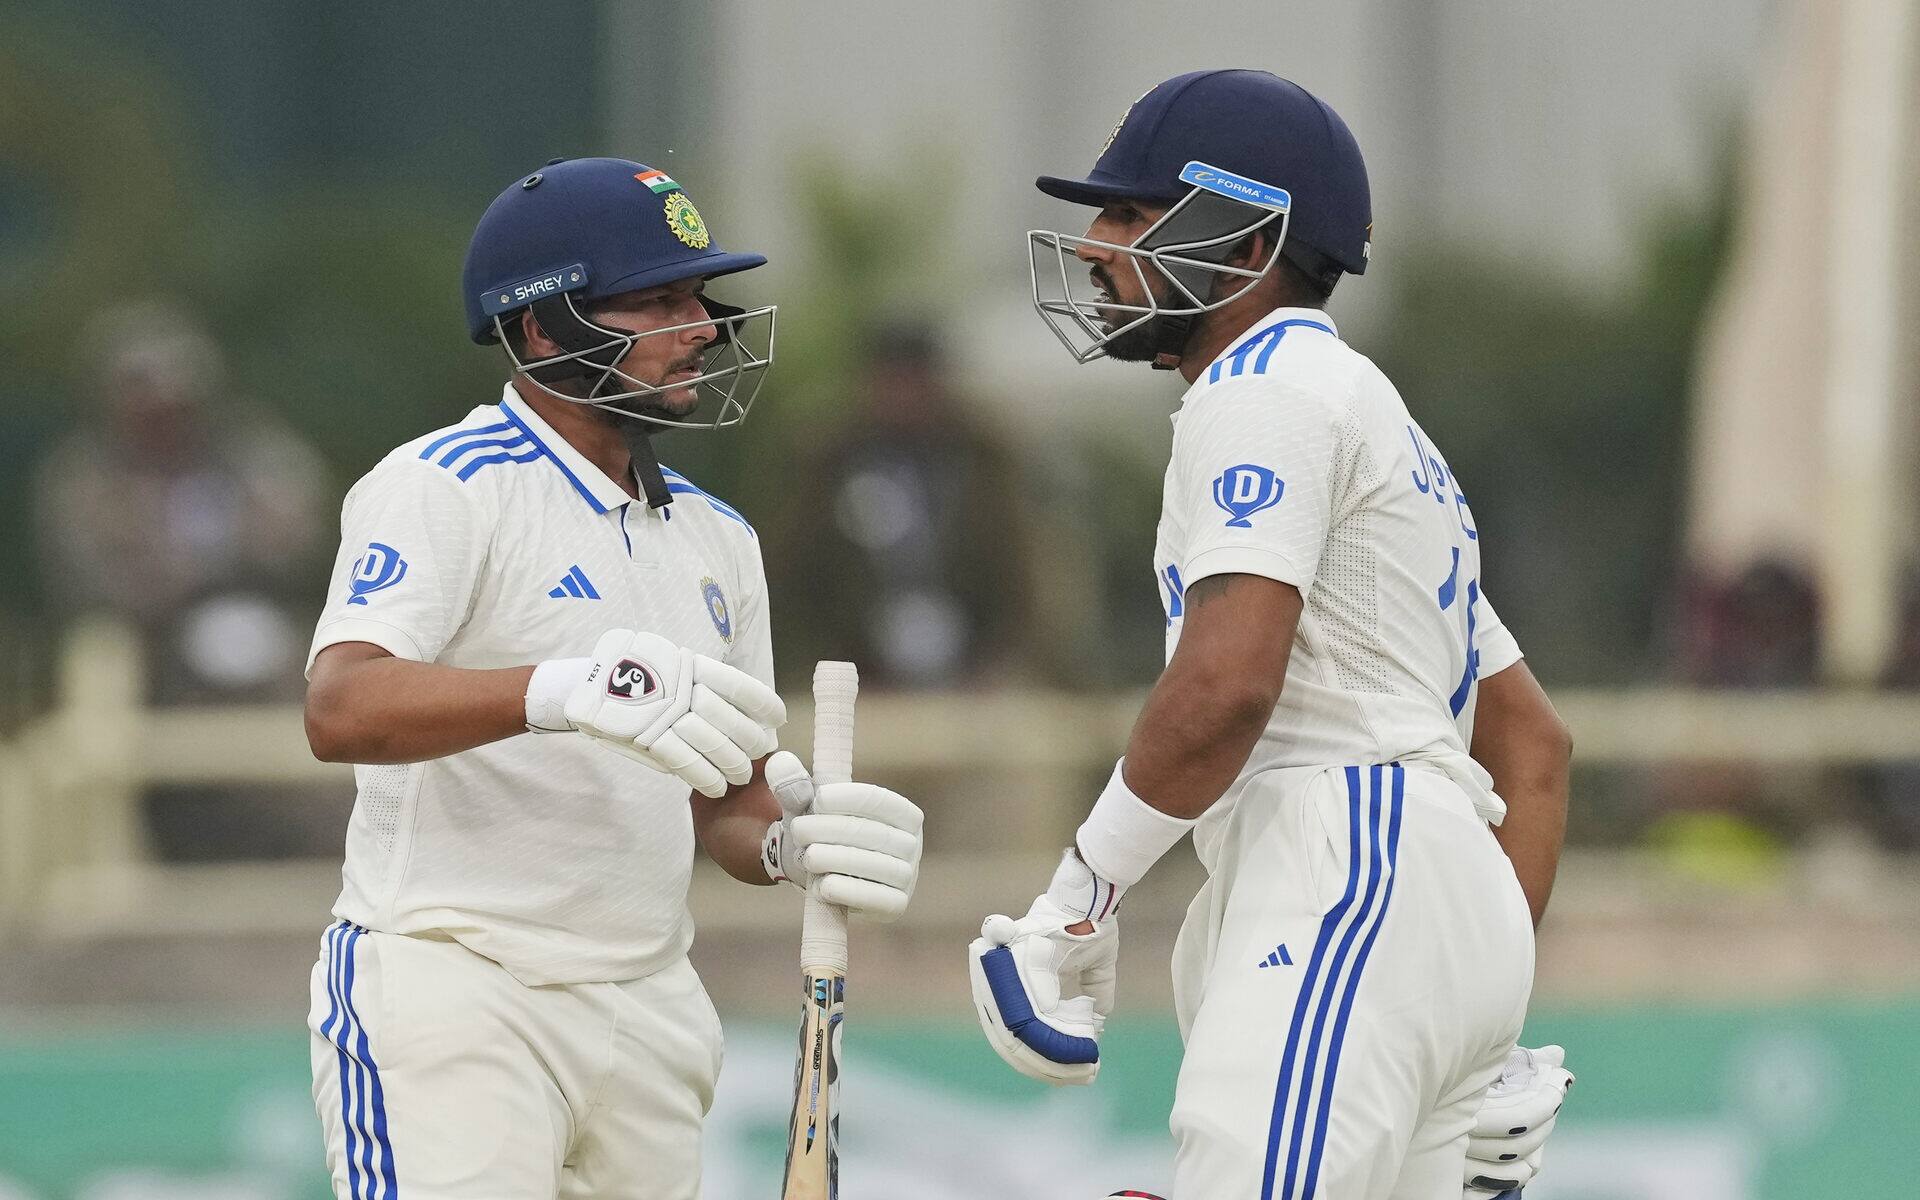 IND vs ENG, 4th Test, Day 3: Live Score, Match Updates, Live Streaming